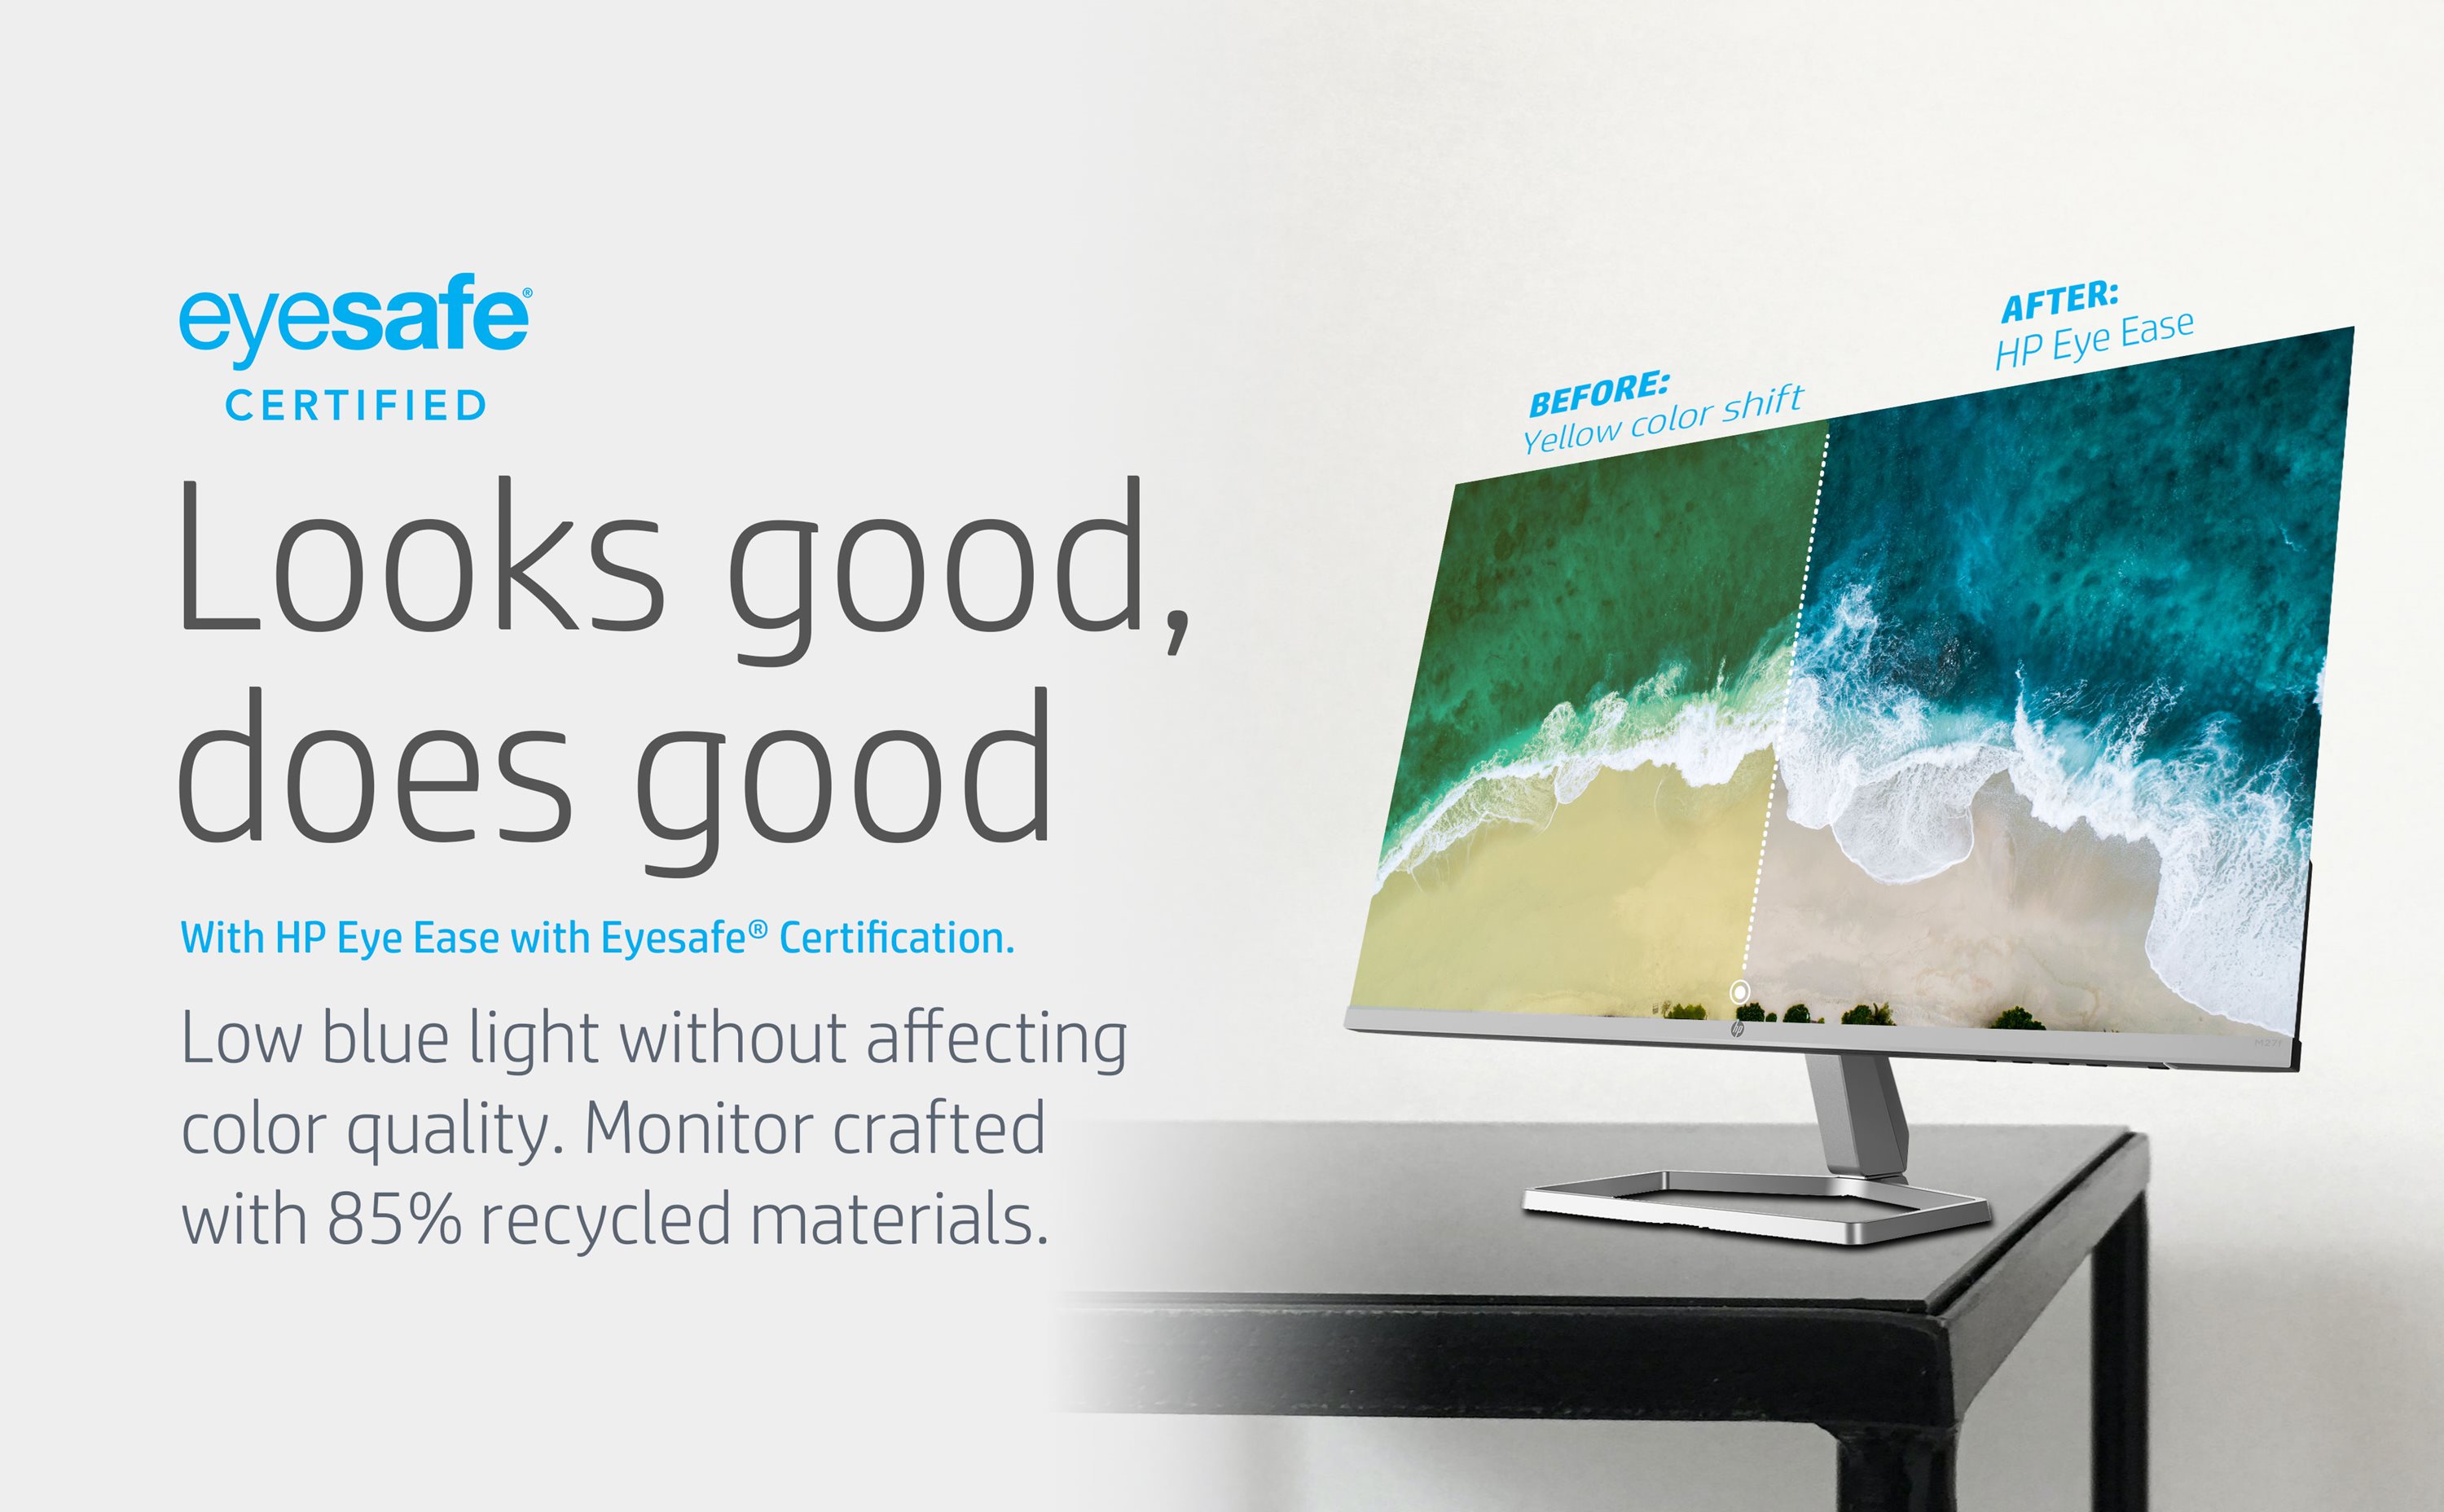 HP M27fq QHD Monitor - Computer Monitor with 27-inch IPS Display (1440p) -  Eyesafe & Color Accurate - AMD Freesync Technology - HDMI - Borderless